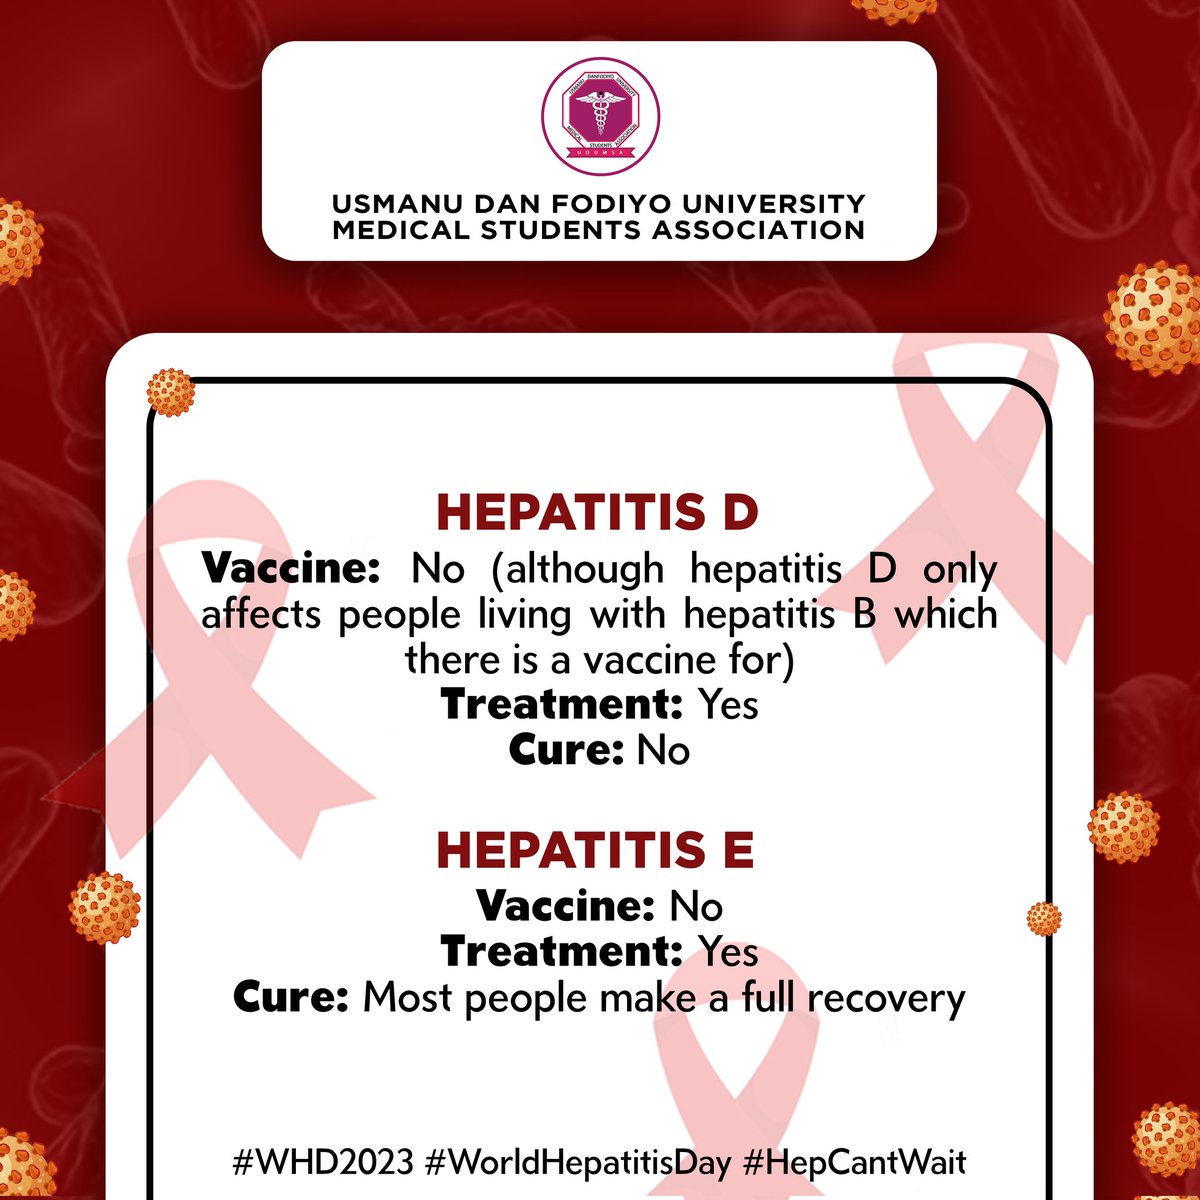 Today is World Hepatitis Day. Let's learn more about hepatitis #WHD2023 #WorldHepatitisDay2023 #HepCantWait #worldhepatitisday_2023 

I designed everything, by the way 😌